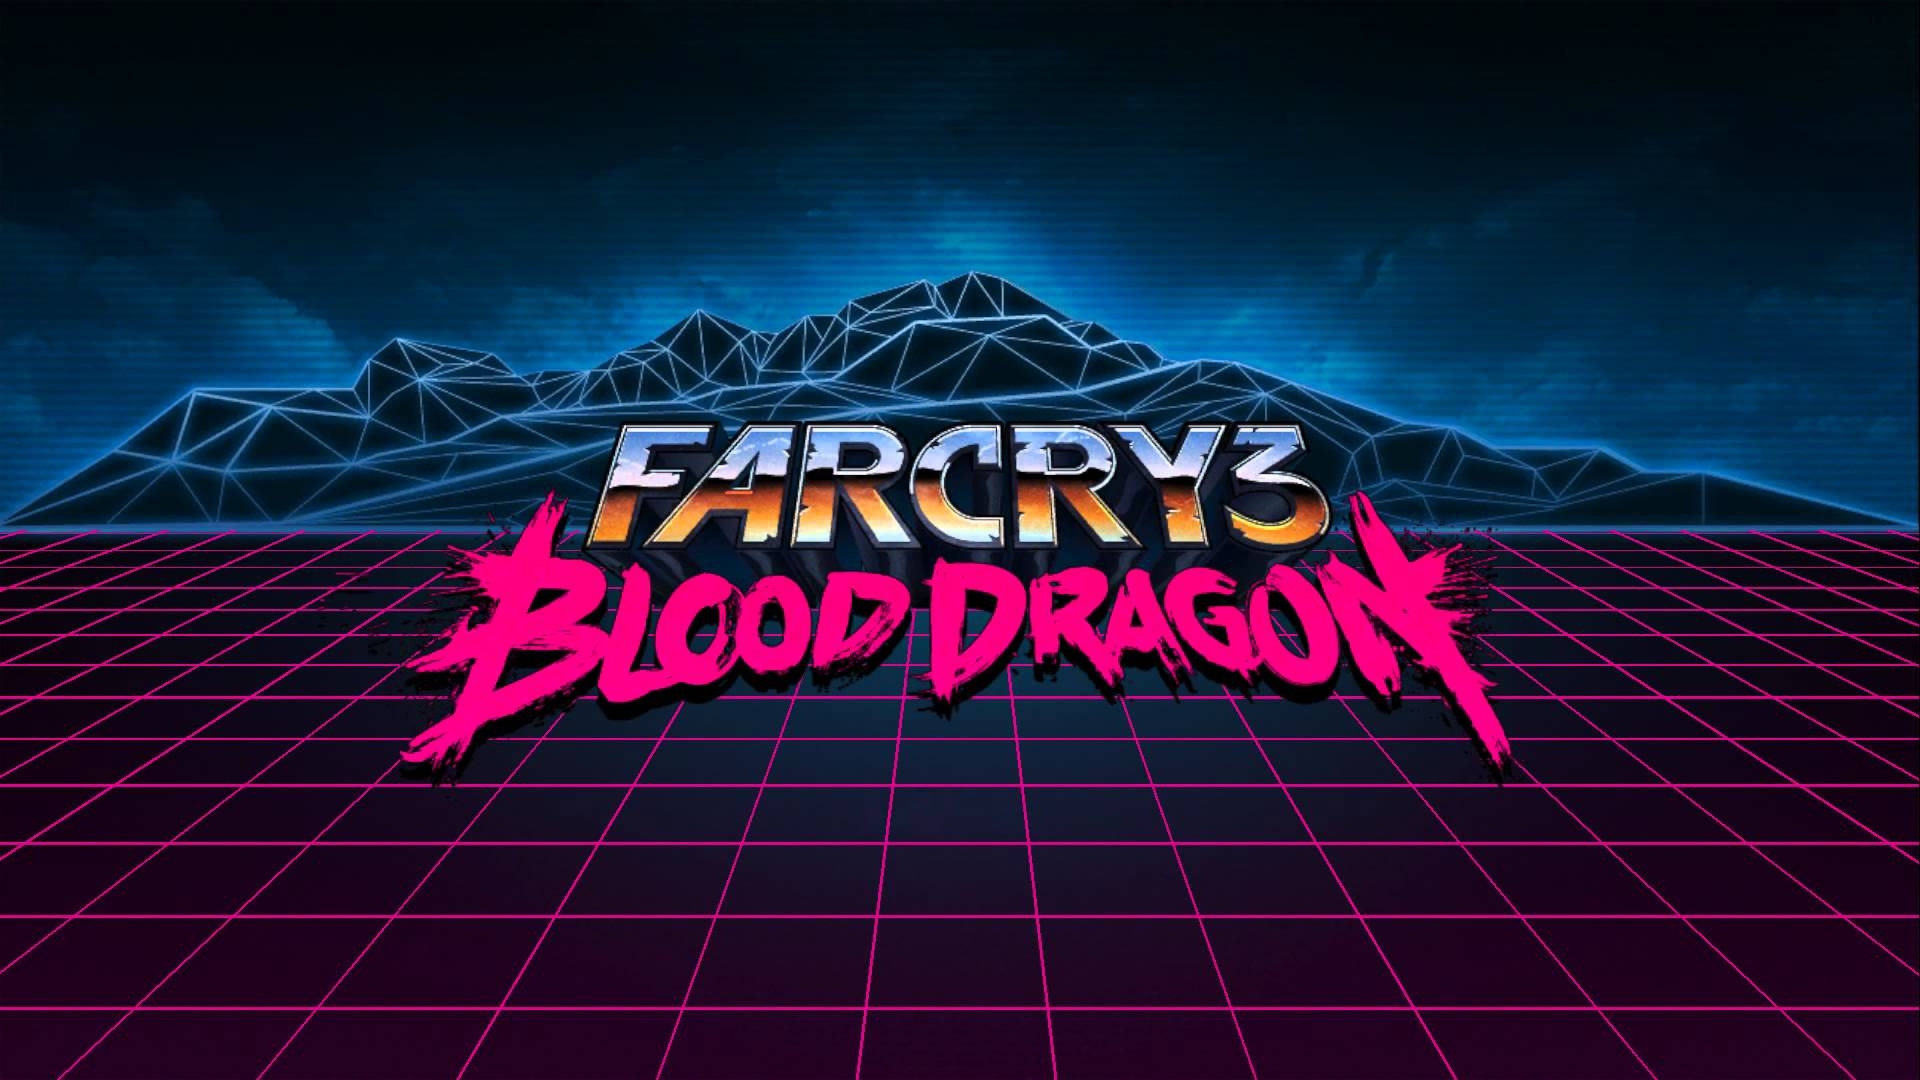 download blood dragon 3 far cry 5 for free